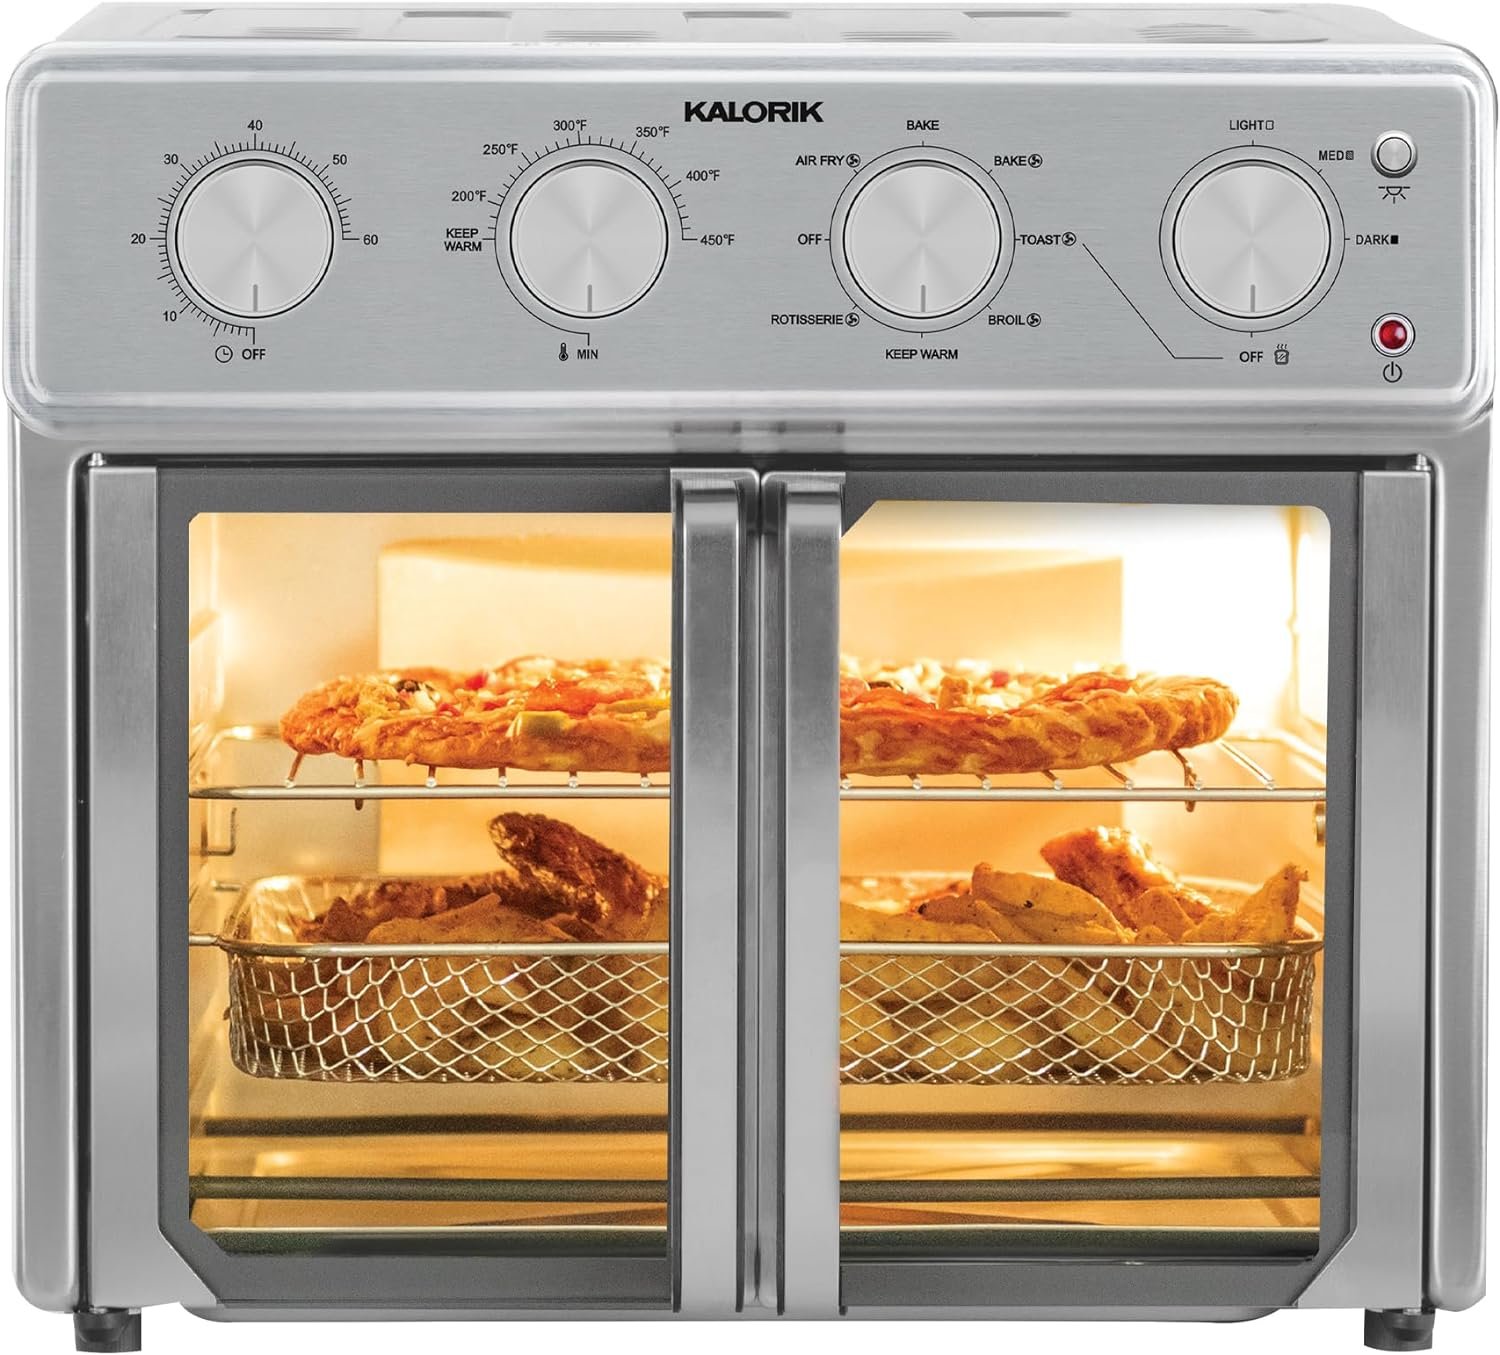 Kalorik MAXX® Air Fryer Oven, 26 Quart 9-in-1 Countertop Toaster Oven and Air Fryer Combo - Fry, Bake, Roast, Rotisserie,  More, 7 Easy-to-Clean Accessories, 1700W, Stainless Steel, AFO 47267 OW